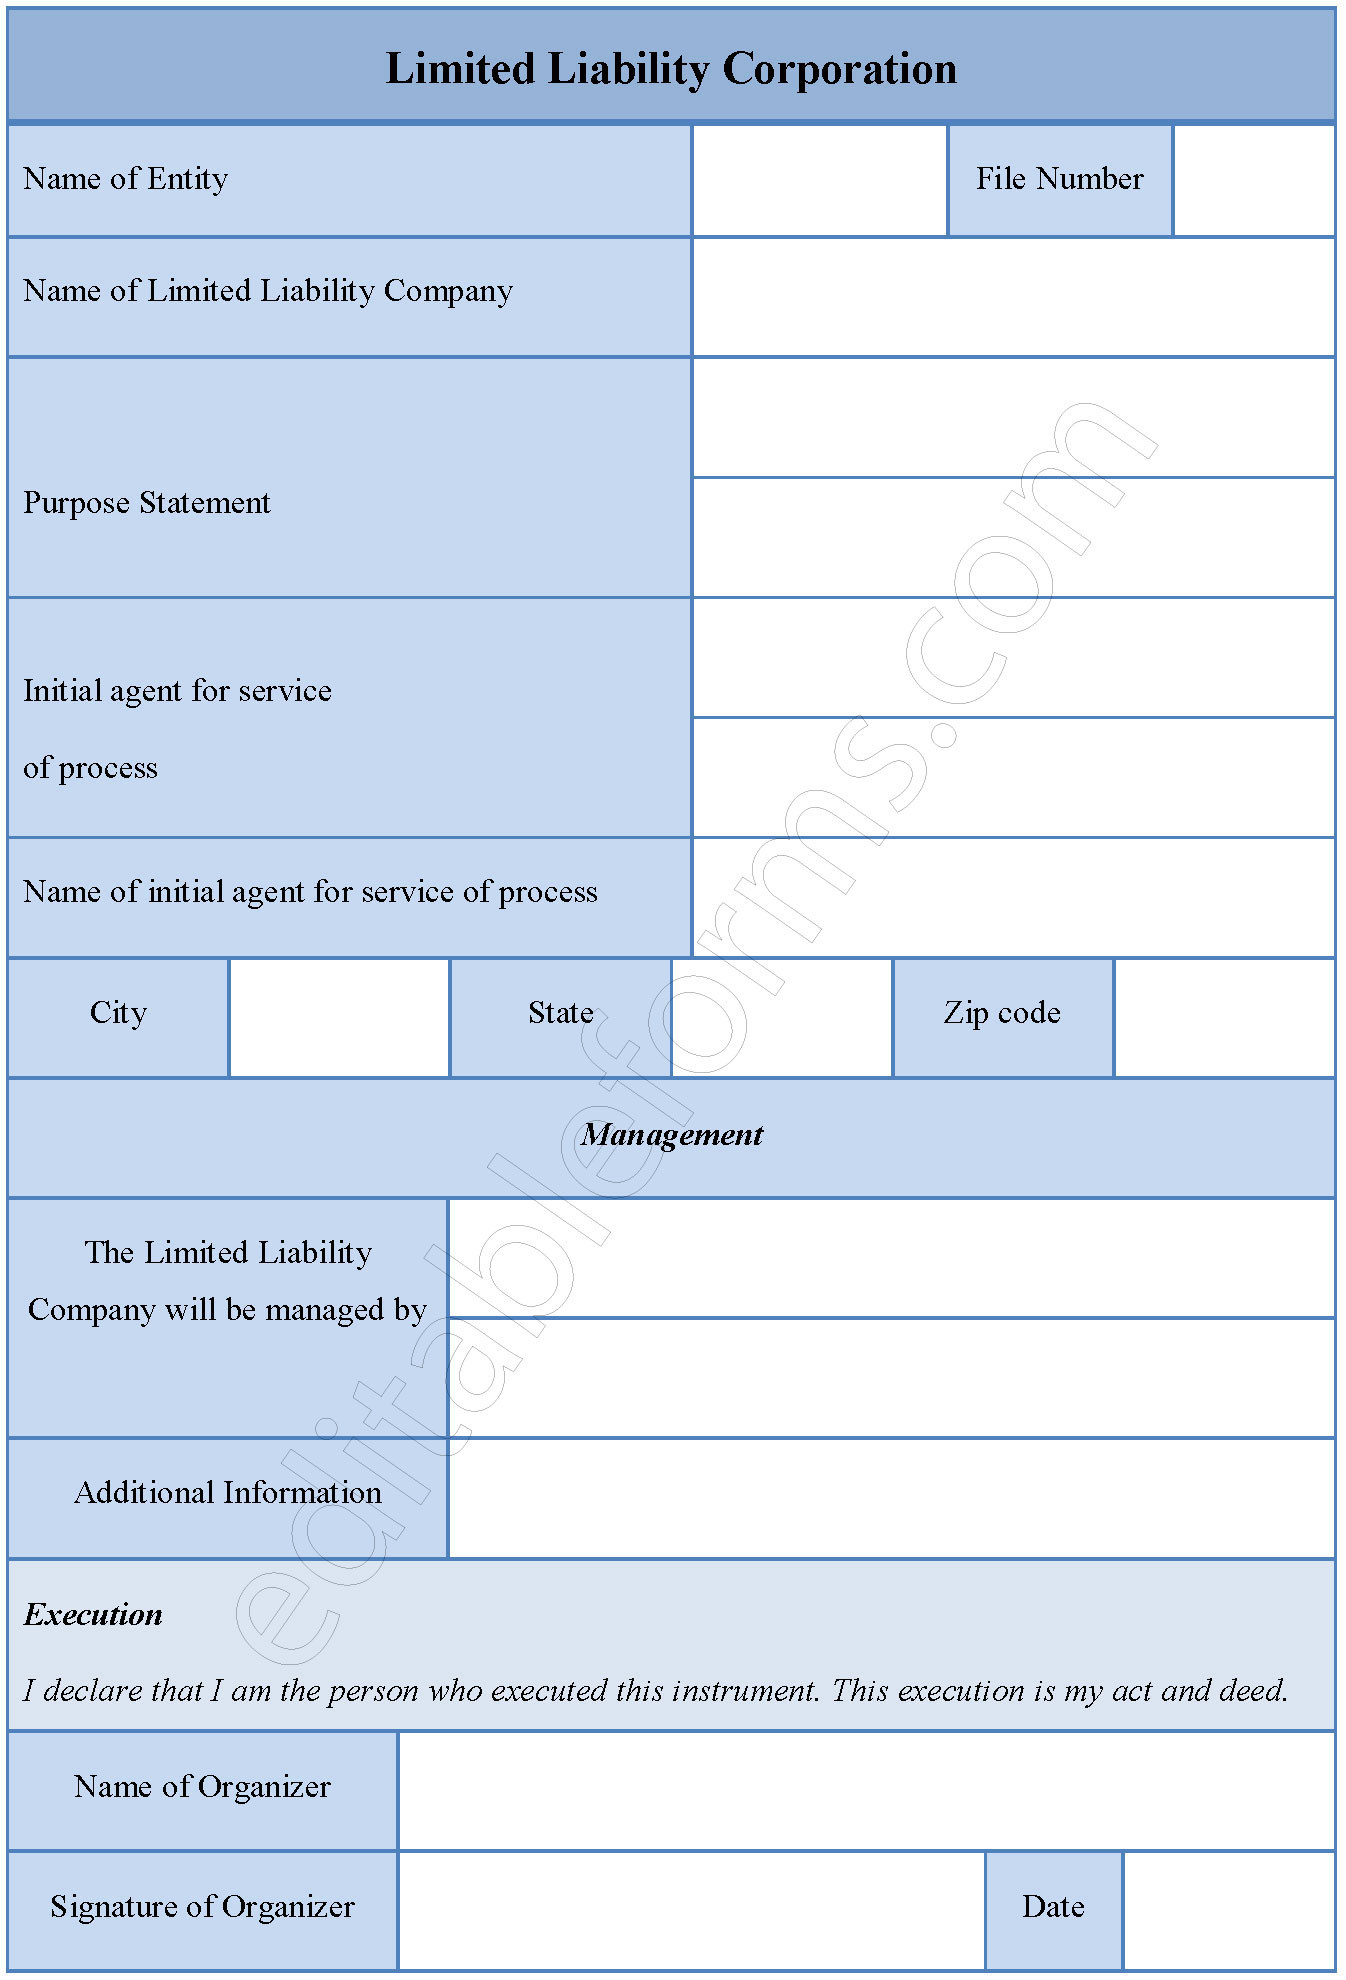 Limited Liability Corporation Fillable PDF Template